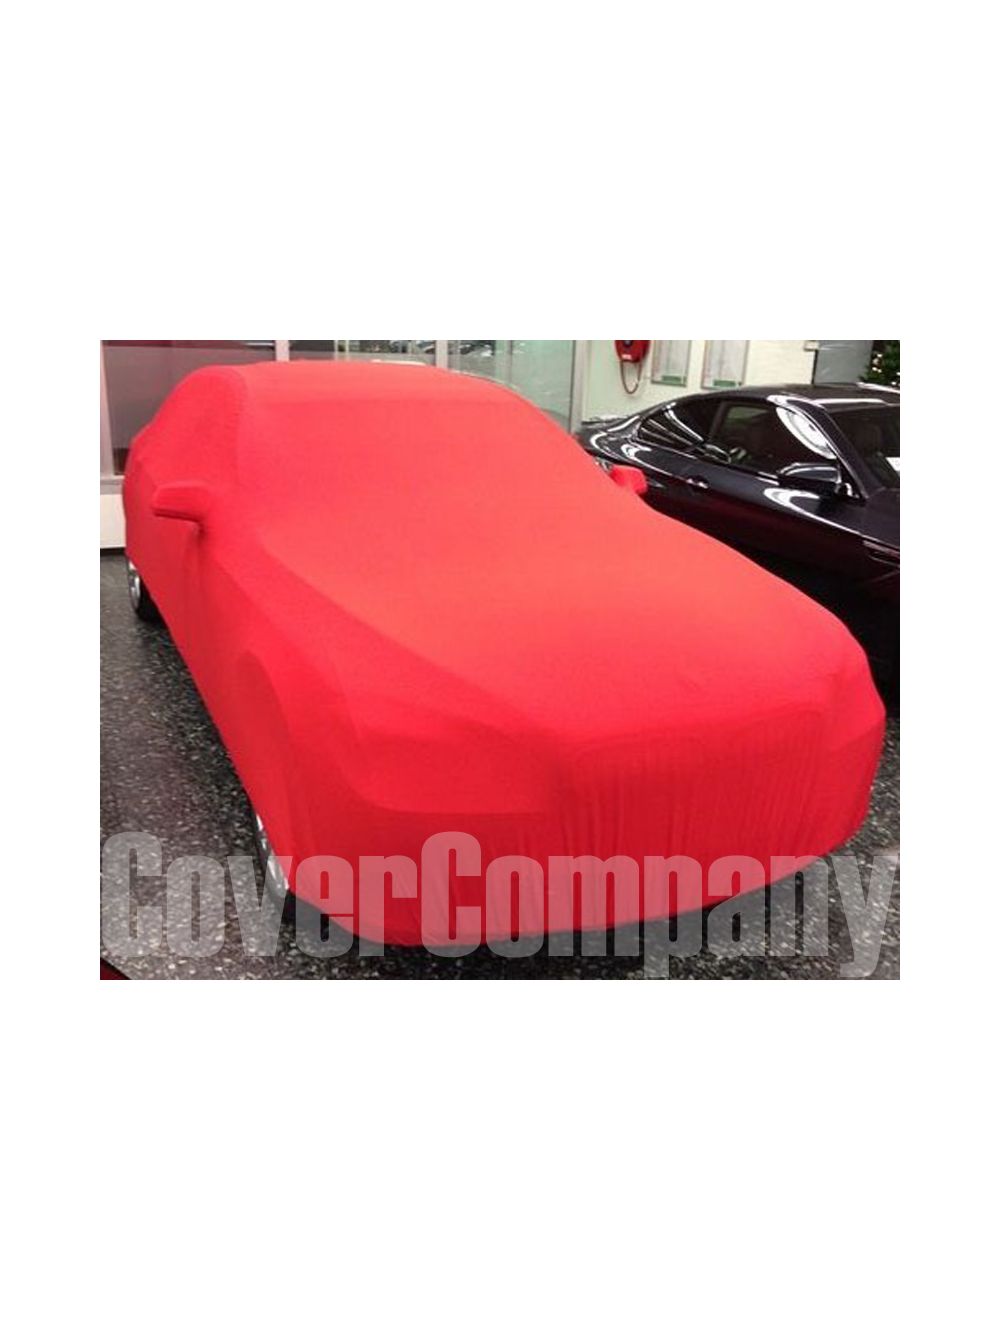 BMW Car Cover. Perfect Fitted car cover for BMW